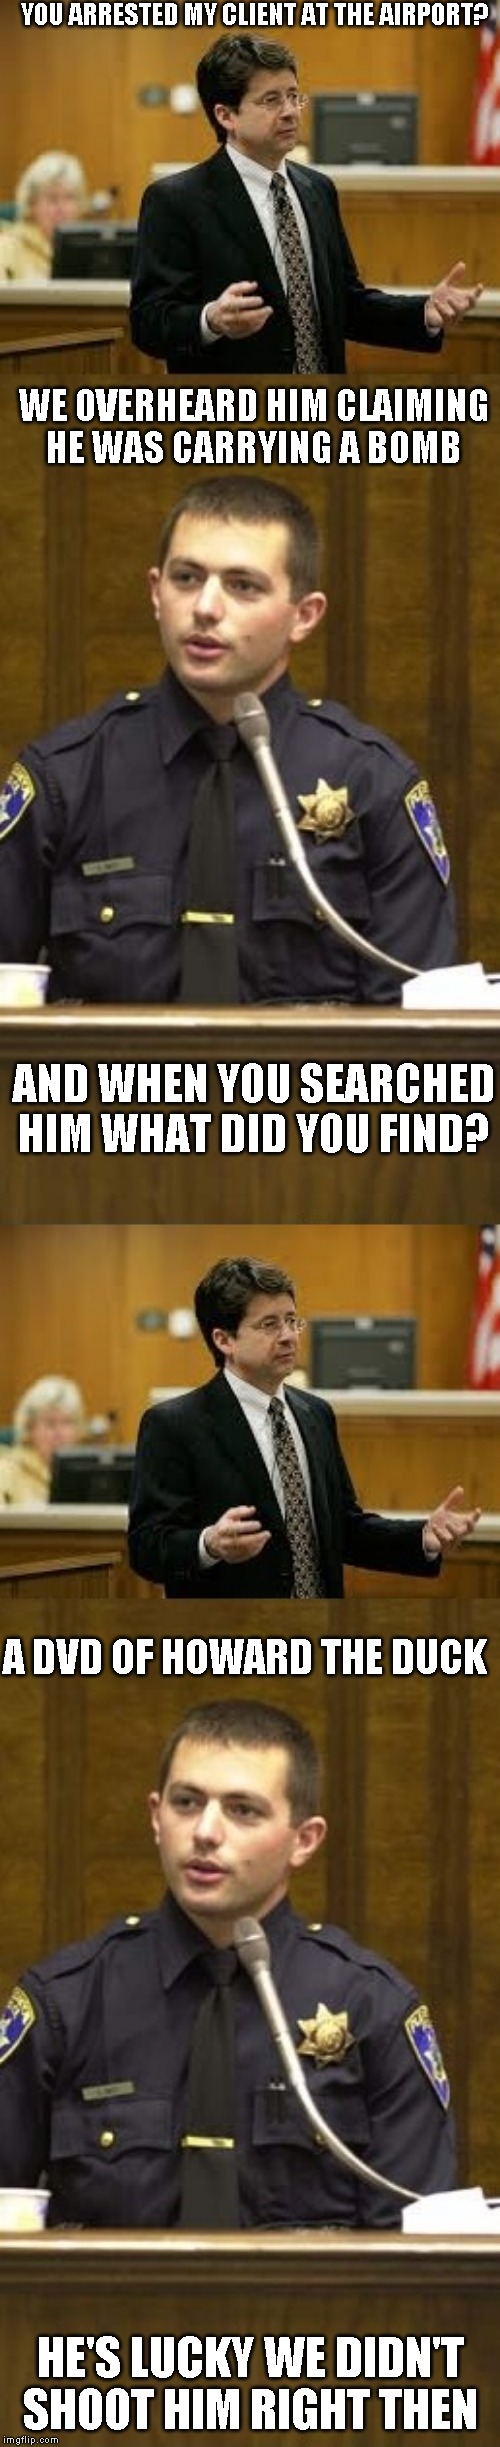 I would have! | YOU ARRESTED MY CLIENT AT THE AIRPORT? WE OVERHEARD HIM CLAIMING HE WAS CARRYING A BOMB; AND WHEN YOU SEARCHED HIM WHAT DID YOU FIND? A DVD OF HOWARD THE DUCK; HE'S LUCKY WE DIDN'T SHOOT HIM RIGHT THEN | image tagged in lawyer and cop testifying,worst movie ever | made w/ Imgflip meme maker